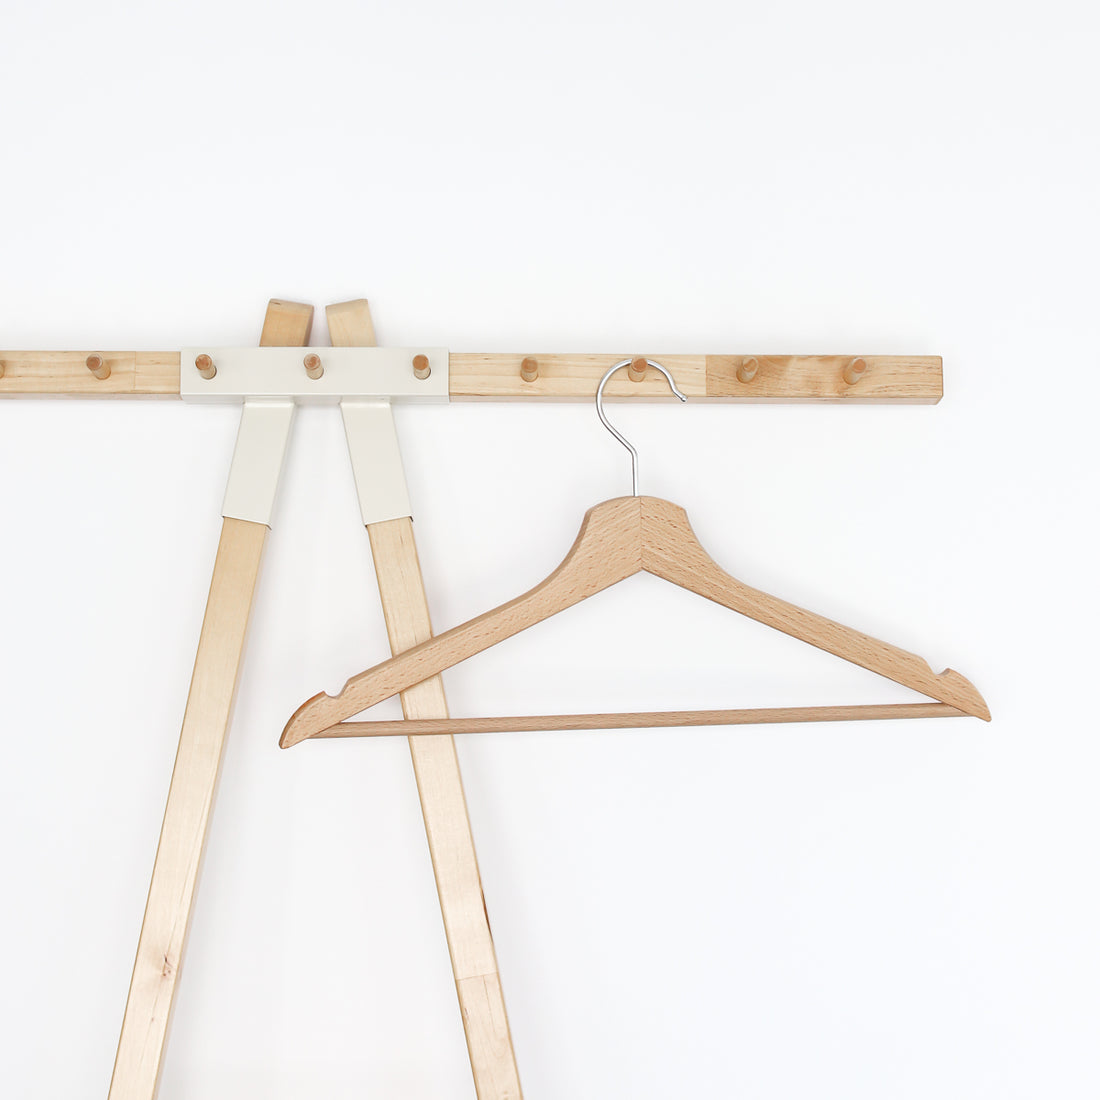 Minimalism: A Beginners Guide To Getting Rid Of Stuff